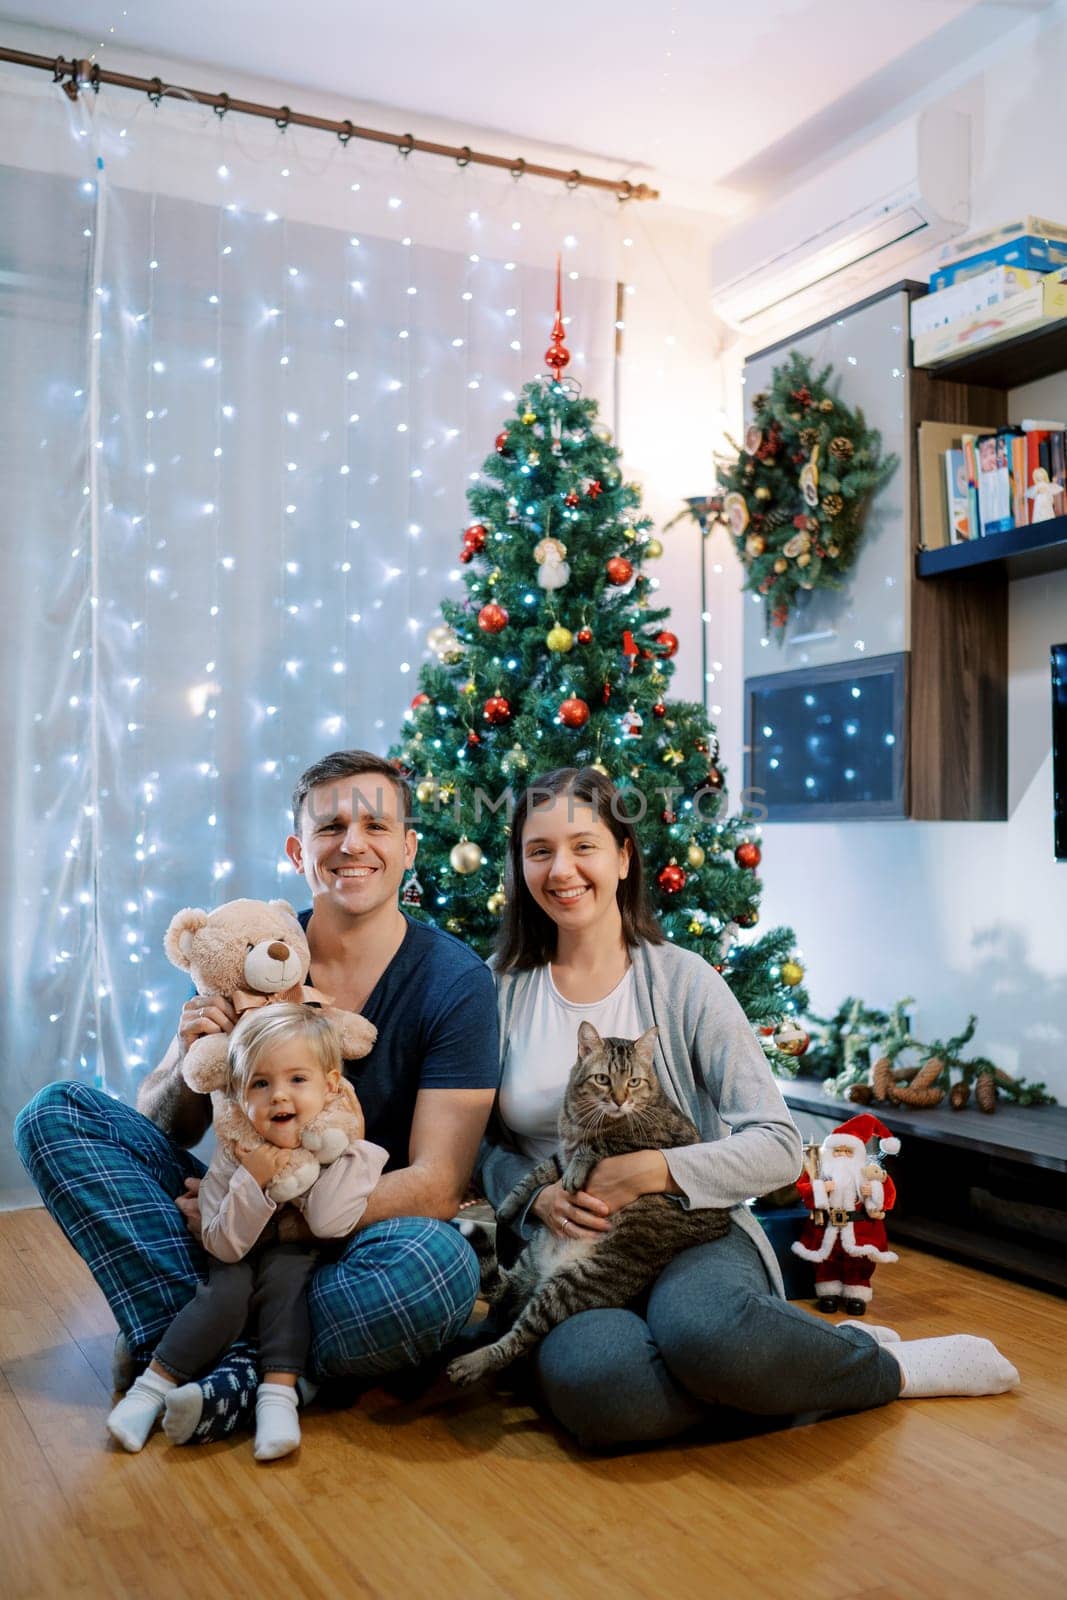 Smiling parents with a little girl and a cat on their knees sit near the Christmas tree on the floor by Nadtochiy